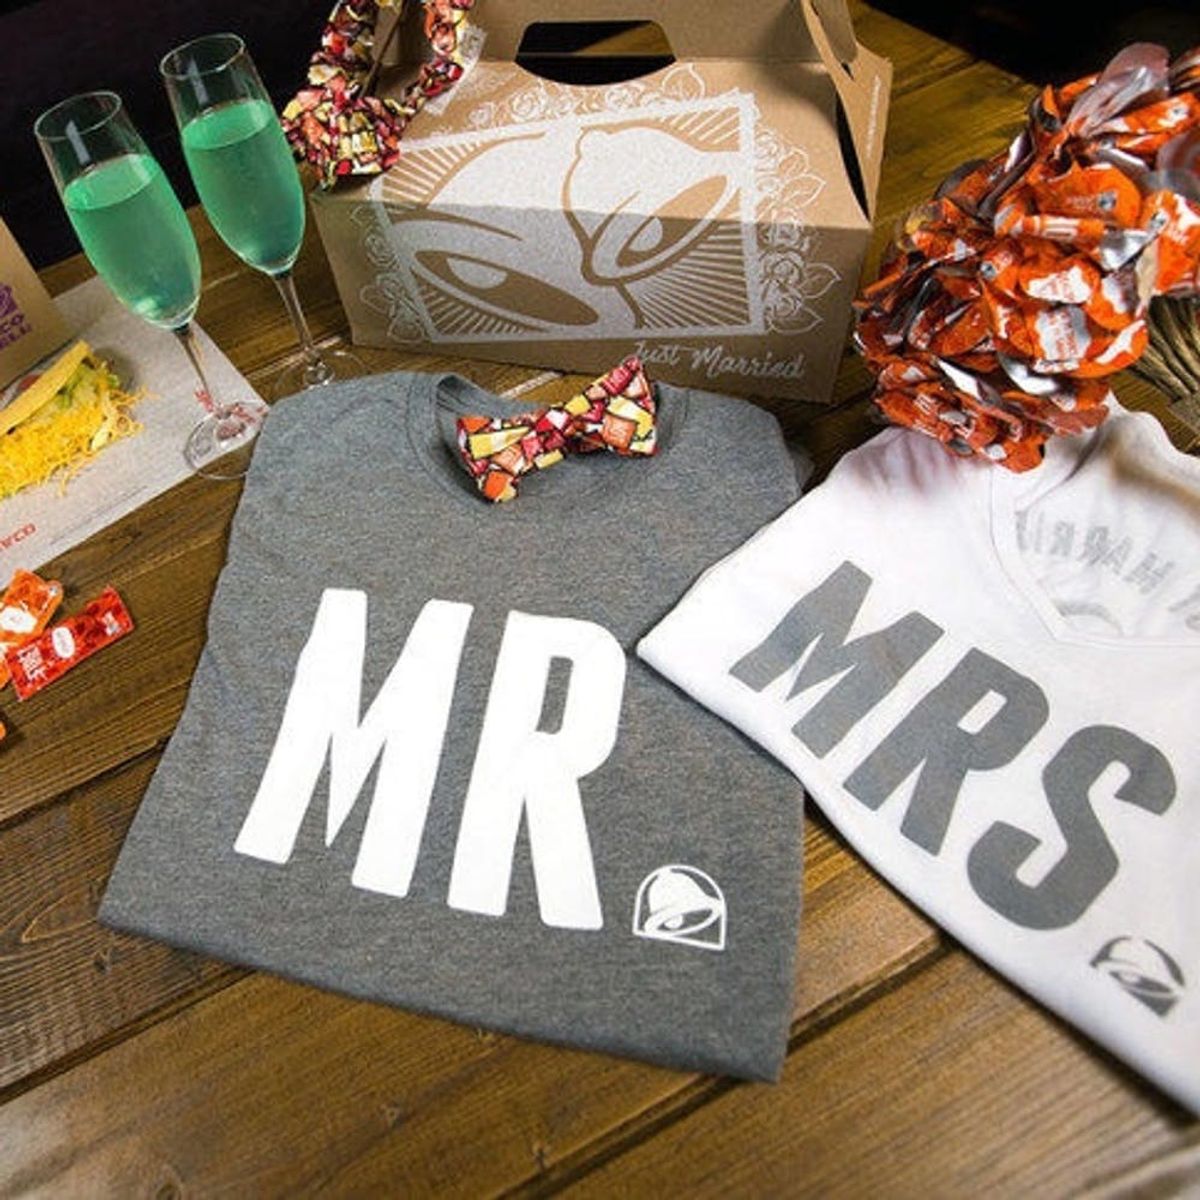 Have the Fast Food Wedding of Your Dream by Getting Married at Taco Bell